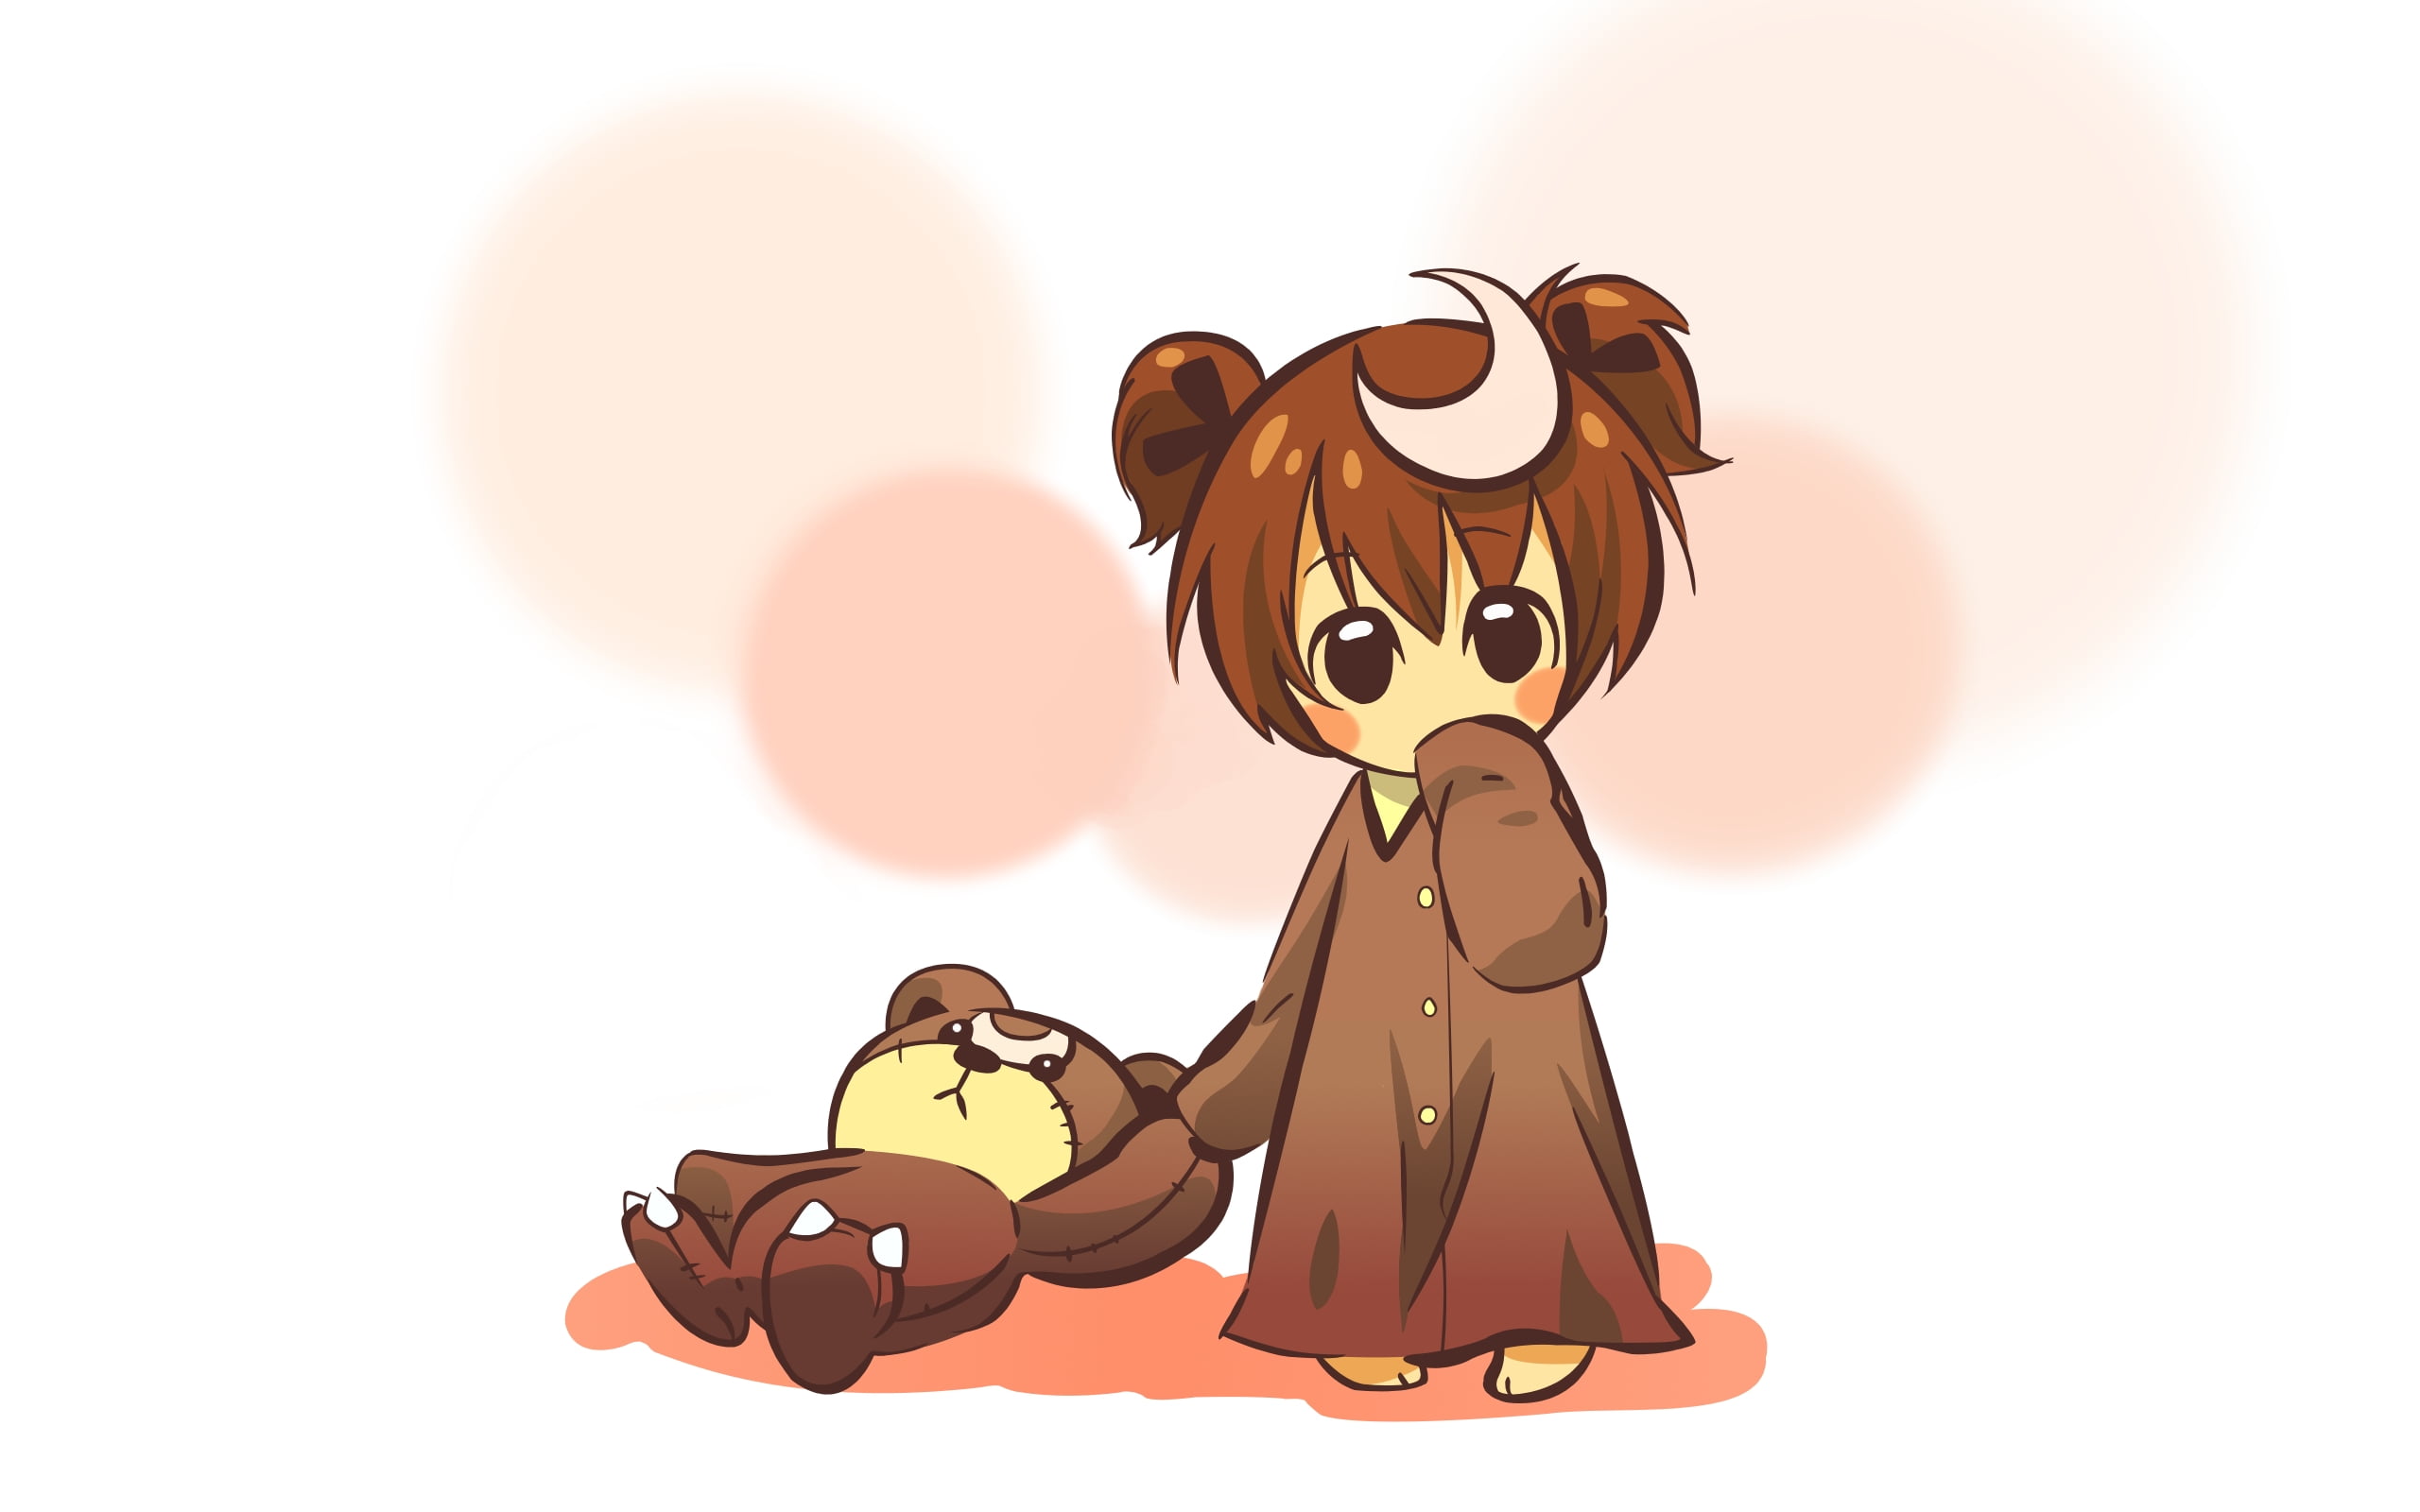 brunette girl anime character in black button-up shirt pulling brown teddy bear